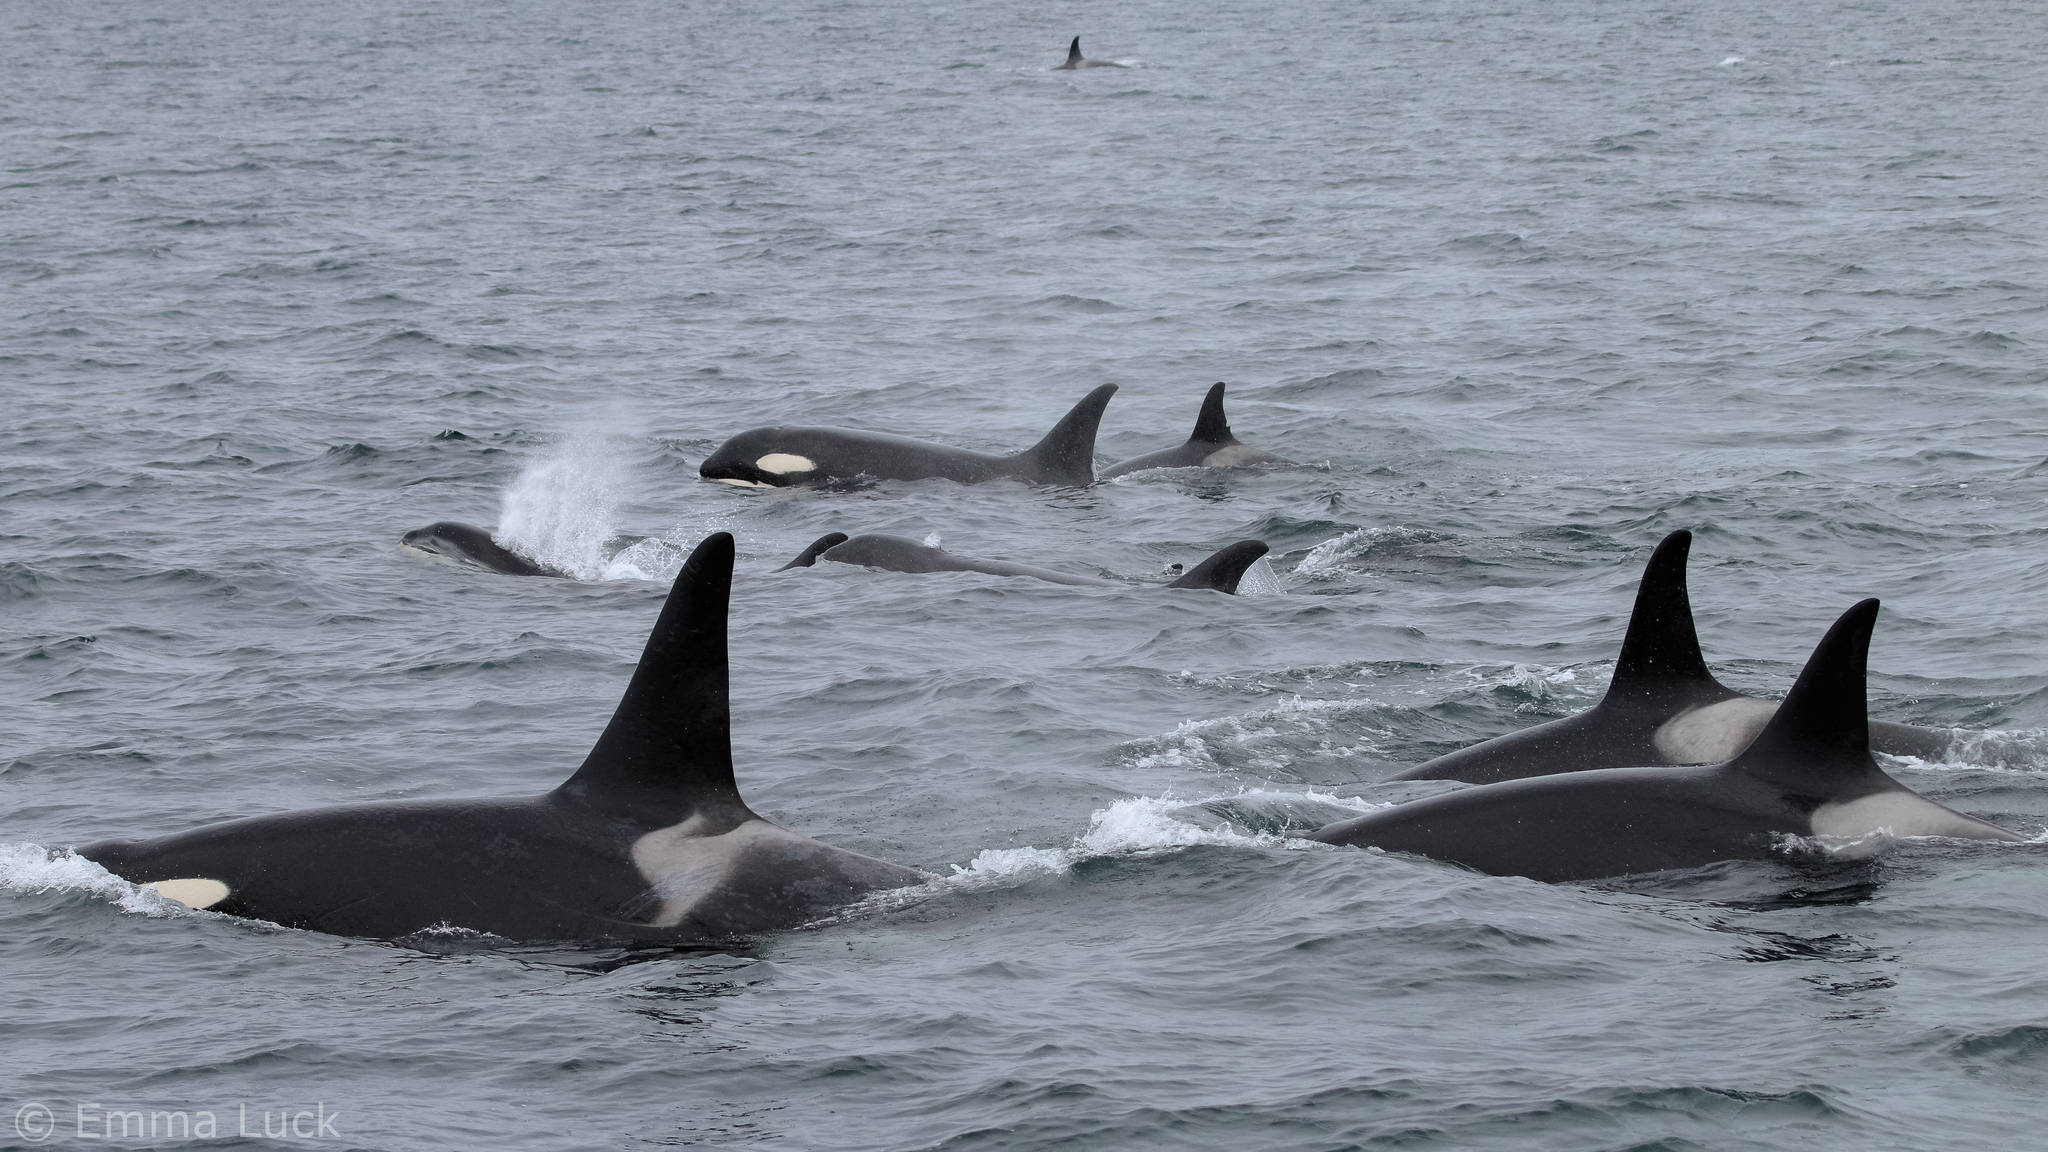 Killer whales from several pods swim in Kachemak Bay on July 9, 2018 near Seldovia, Alaska. About 40 resident whales were seen in the area. Emma Luck, a University of Alaska Southeast marine biology student saw the whales while working as a naturalist for Rainbow Tours. “I’ve personally never seen so many killer whales in one spot,” Luck said. “It was a sight to behold.” (Photo by Emma Luck)